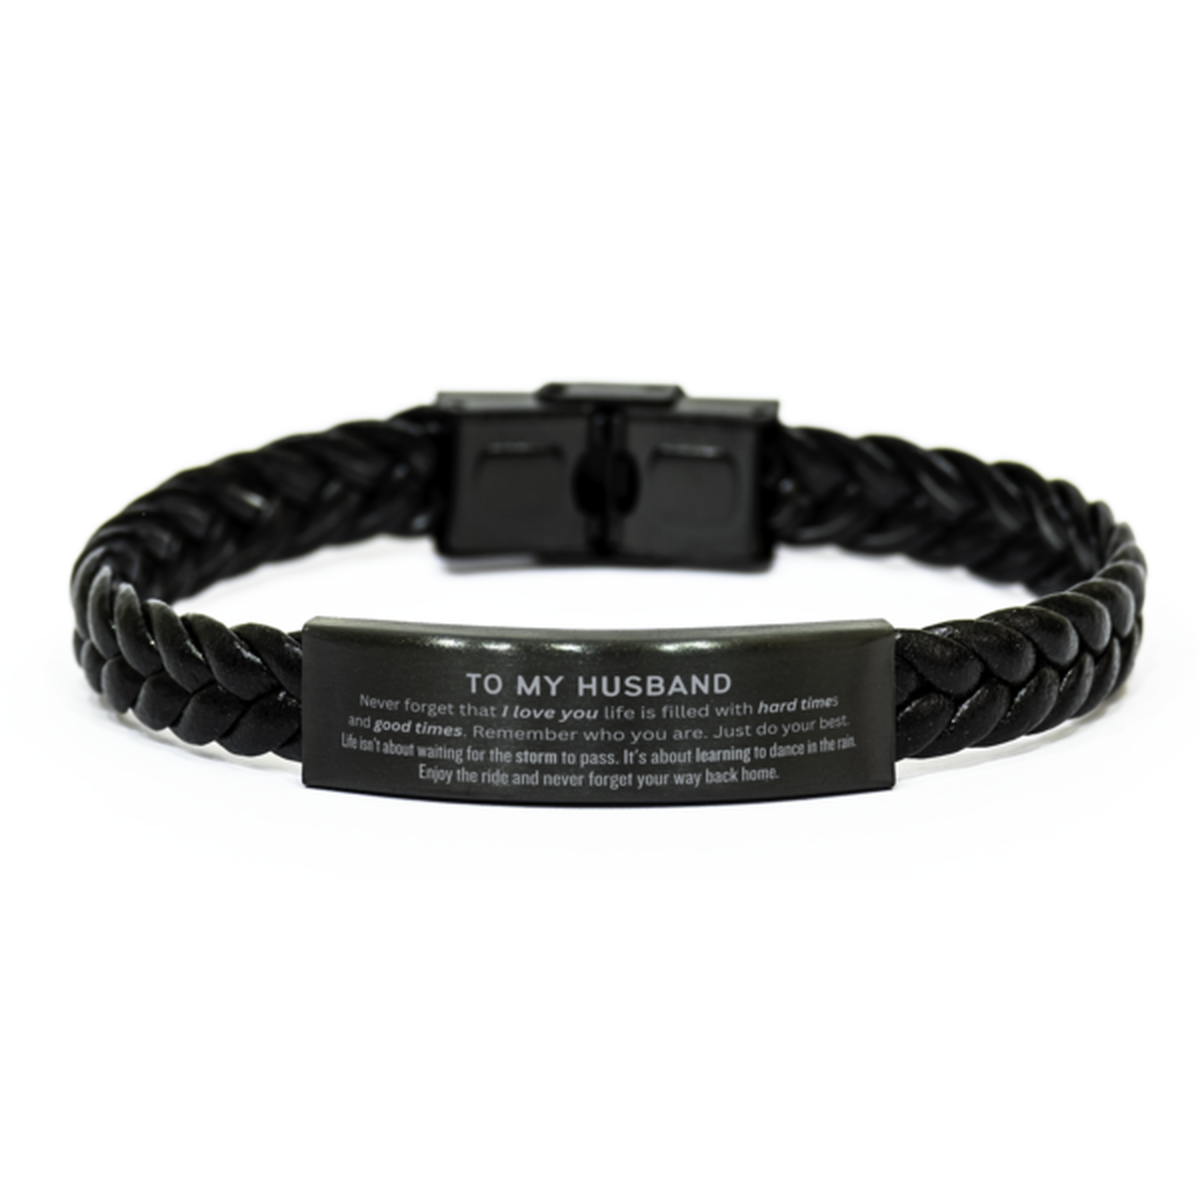 Christmas Husband Braided Leather Bracelet Gifts, To My Husband Birthday Thank You Gifts For Husband, Graduation Unique Gifts For Husband To My Husband Never forget that I love you life is filled with hard times and good times. Remember who you are. Just